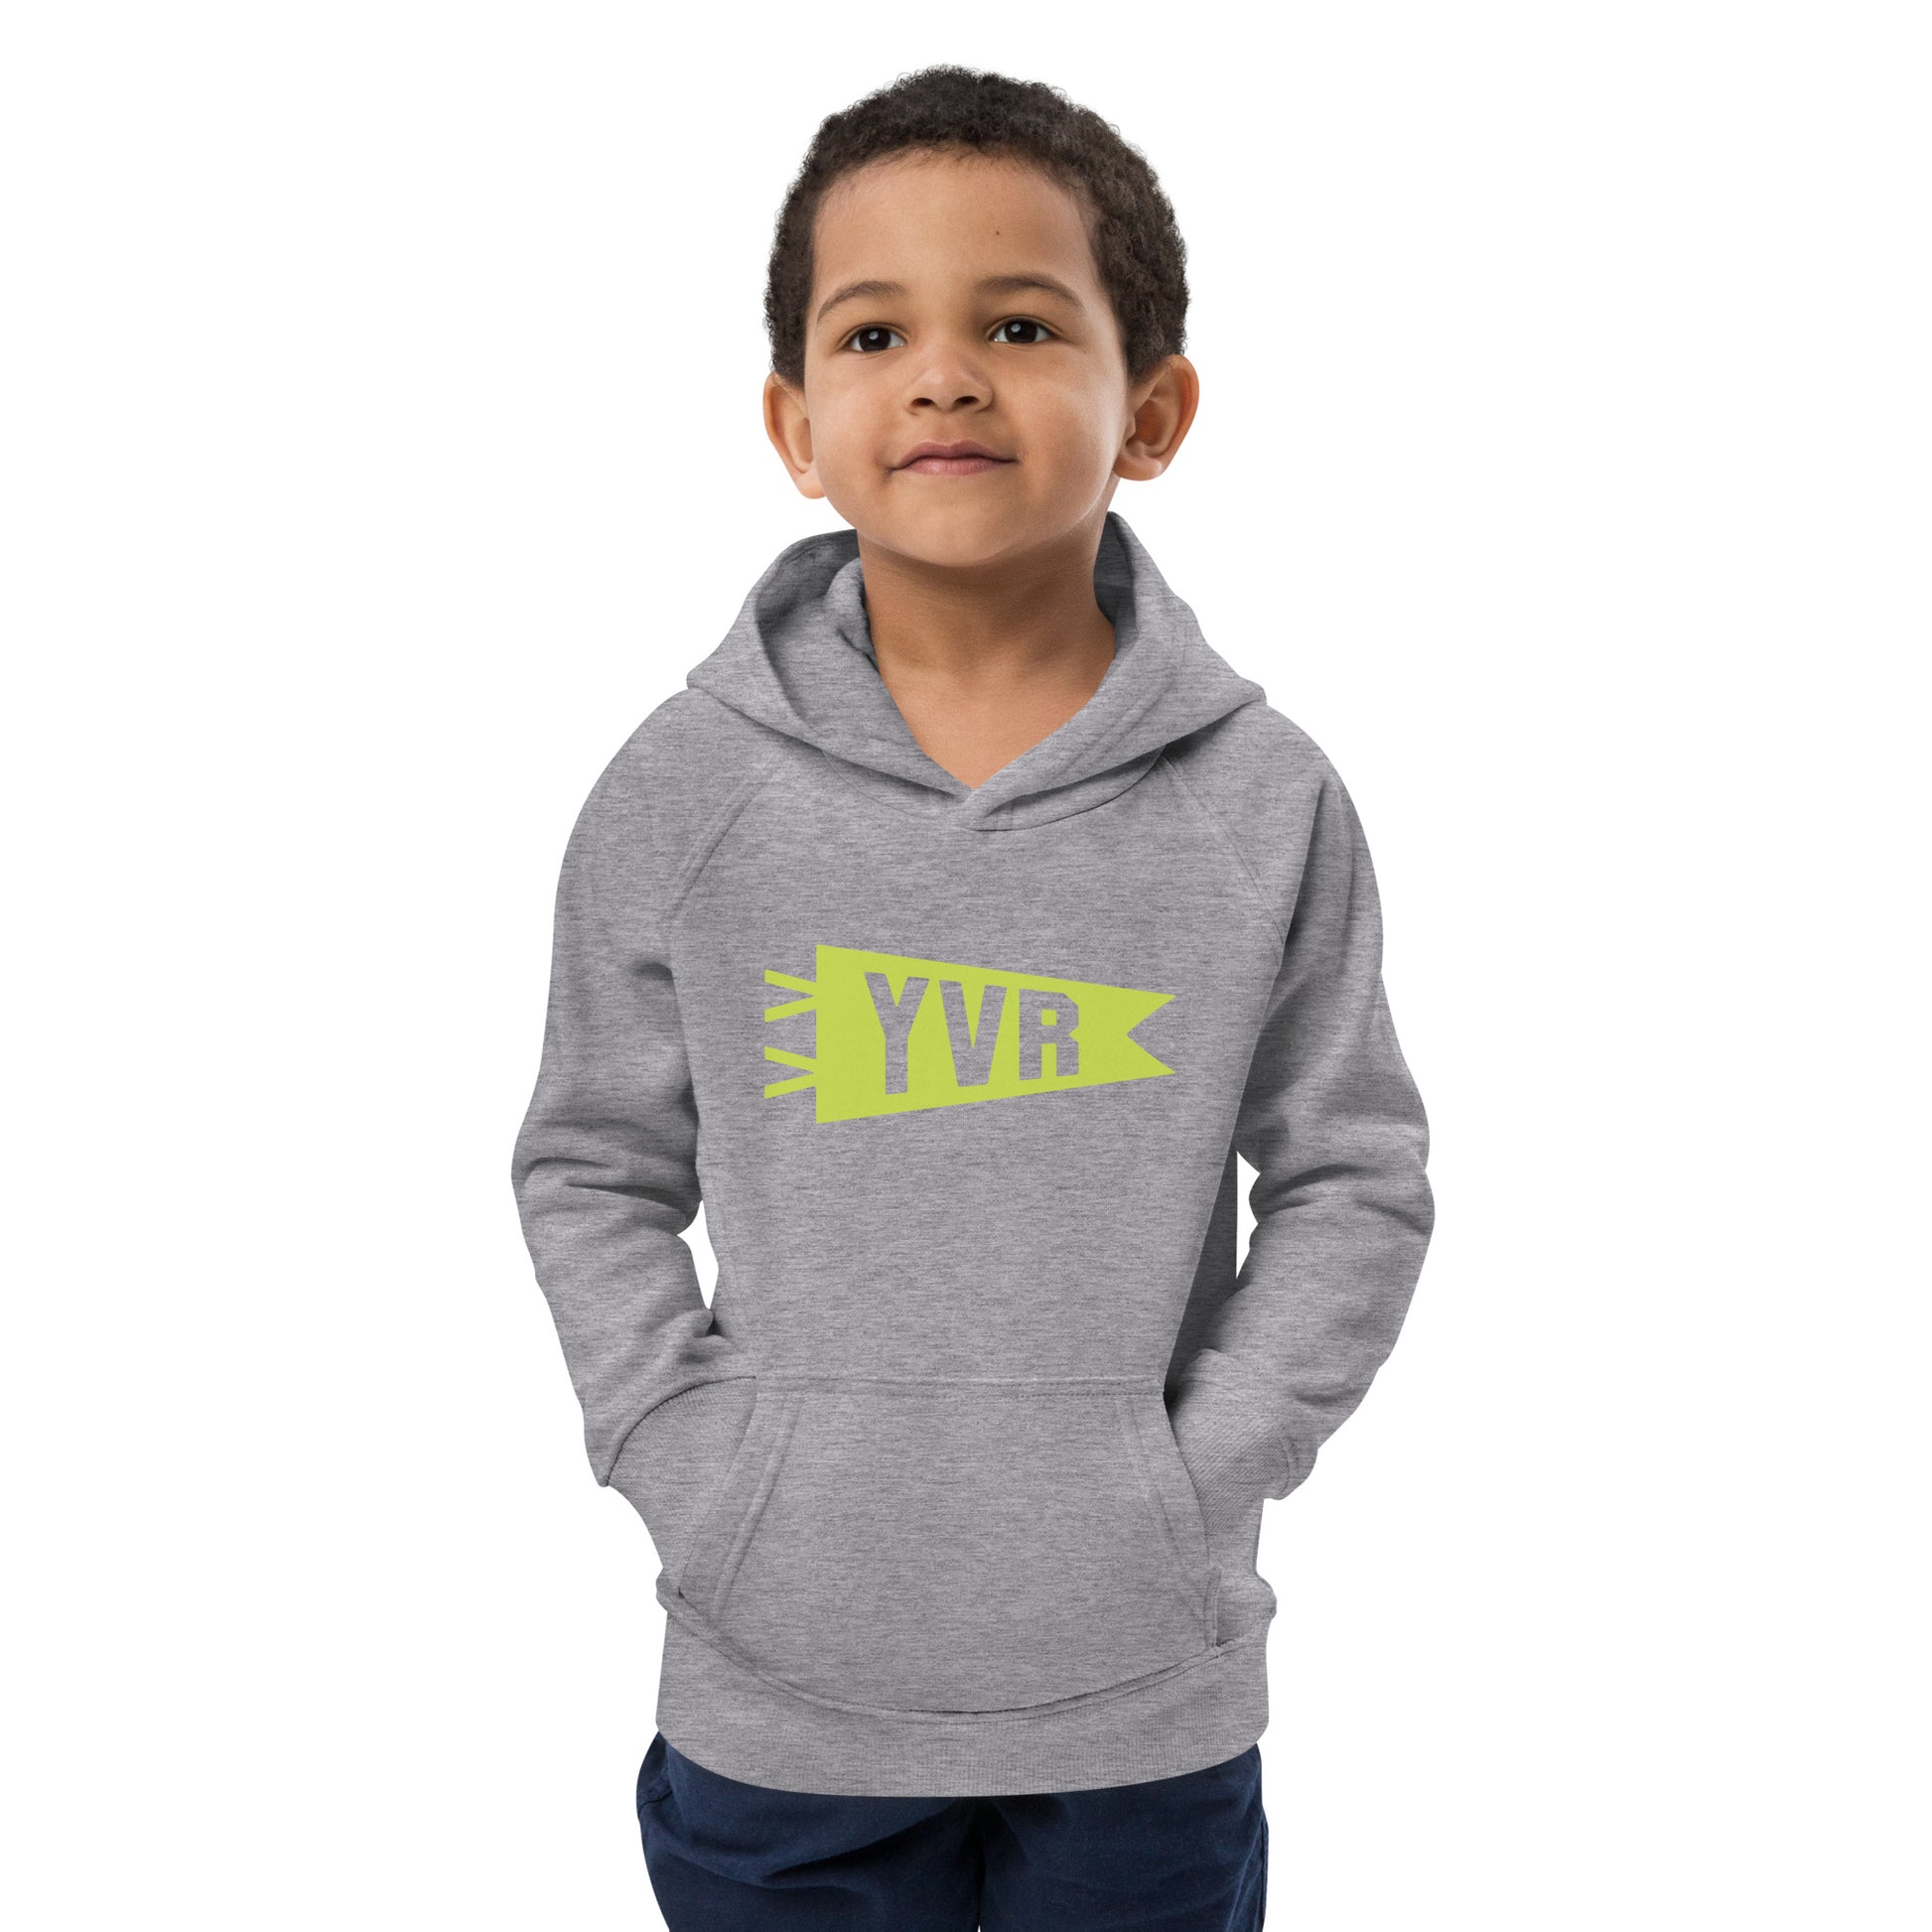 Kid's Sustainable Hoodie - Green Graphic • YVR Vancouver • YHM Designs - Image 11